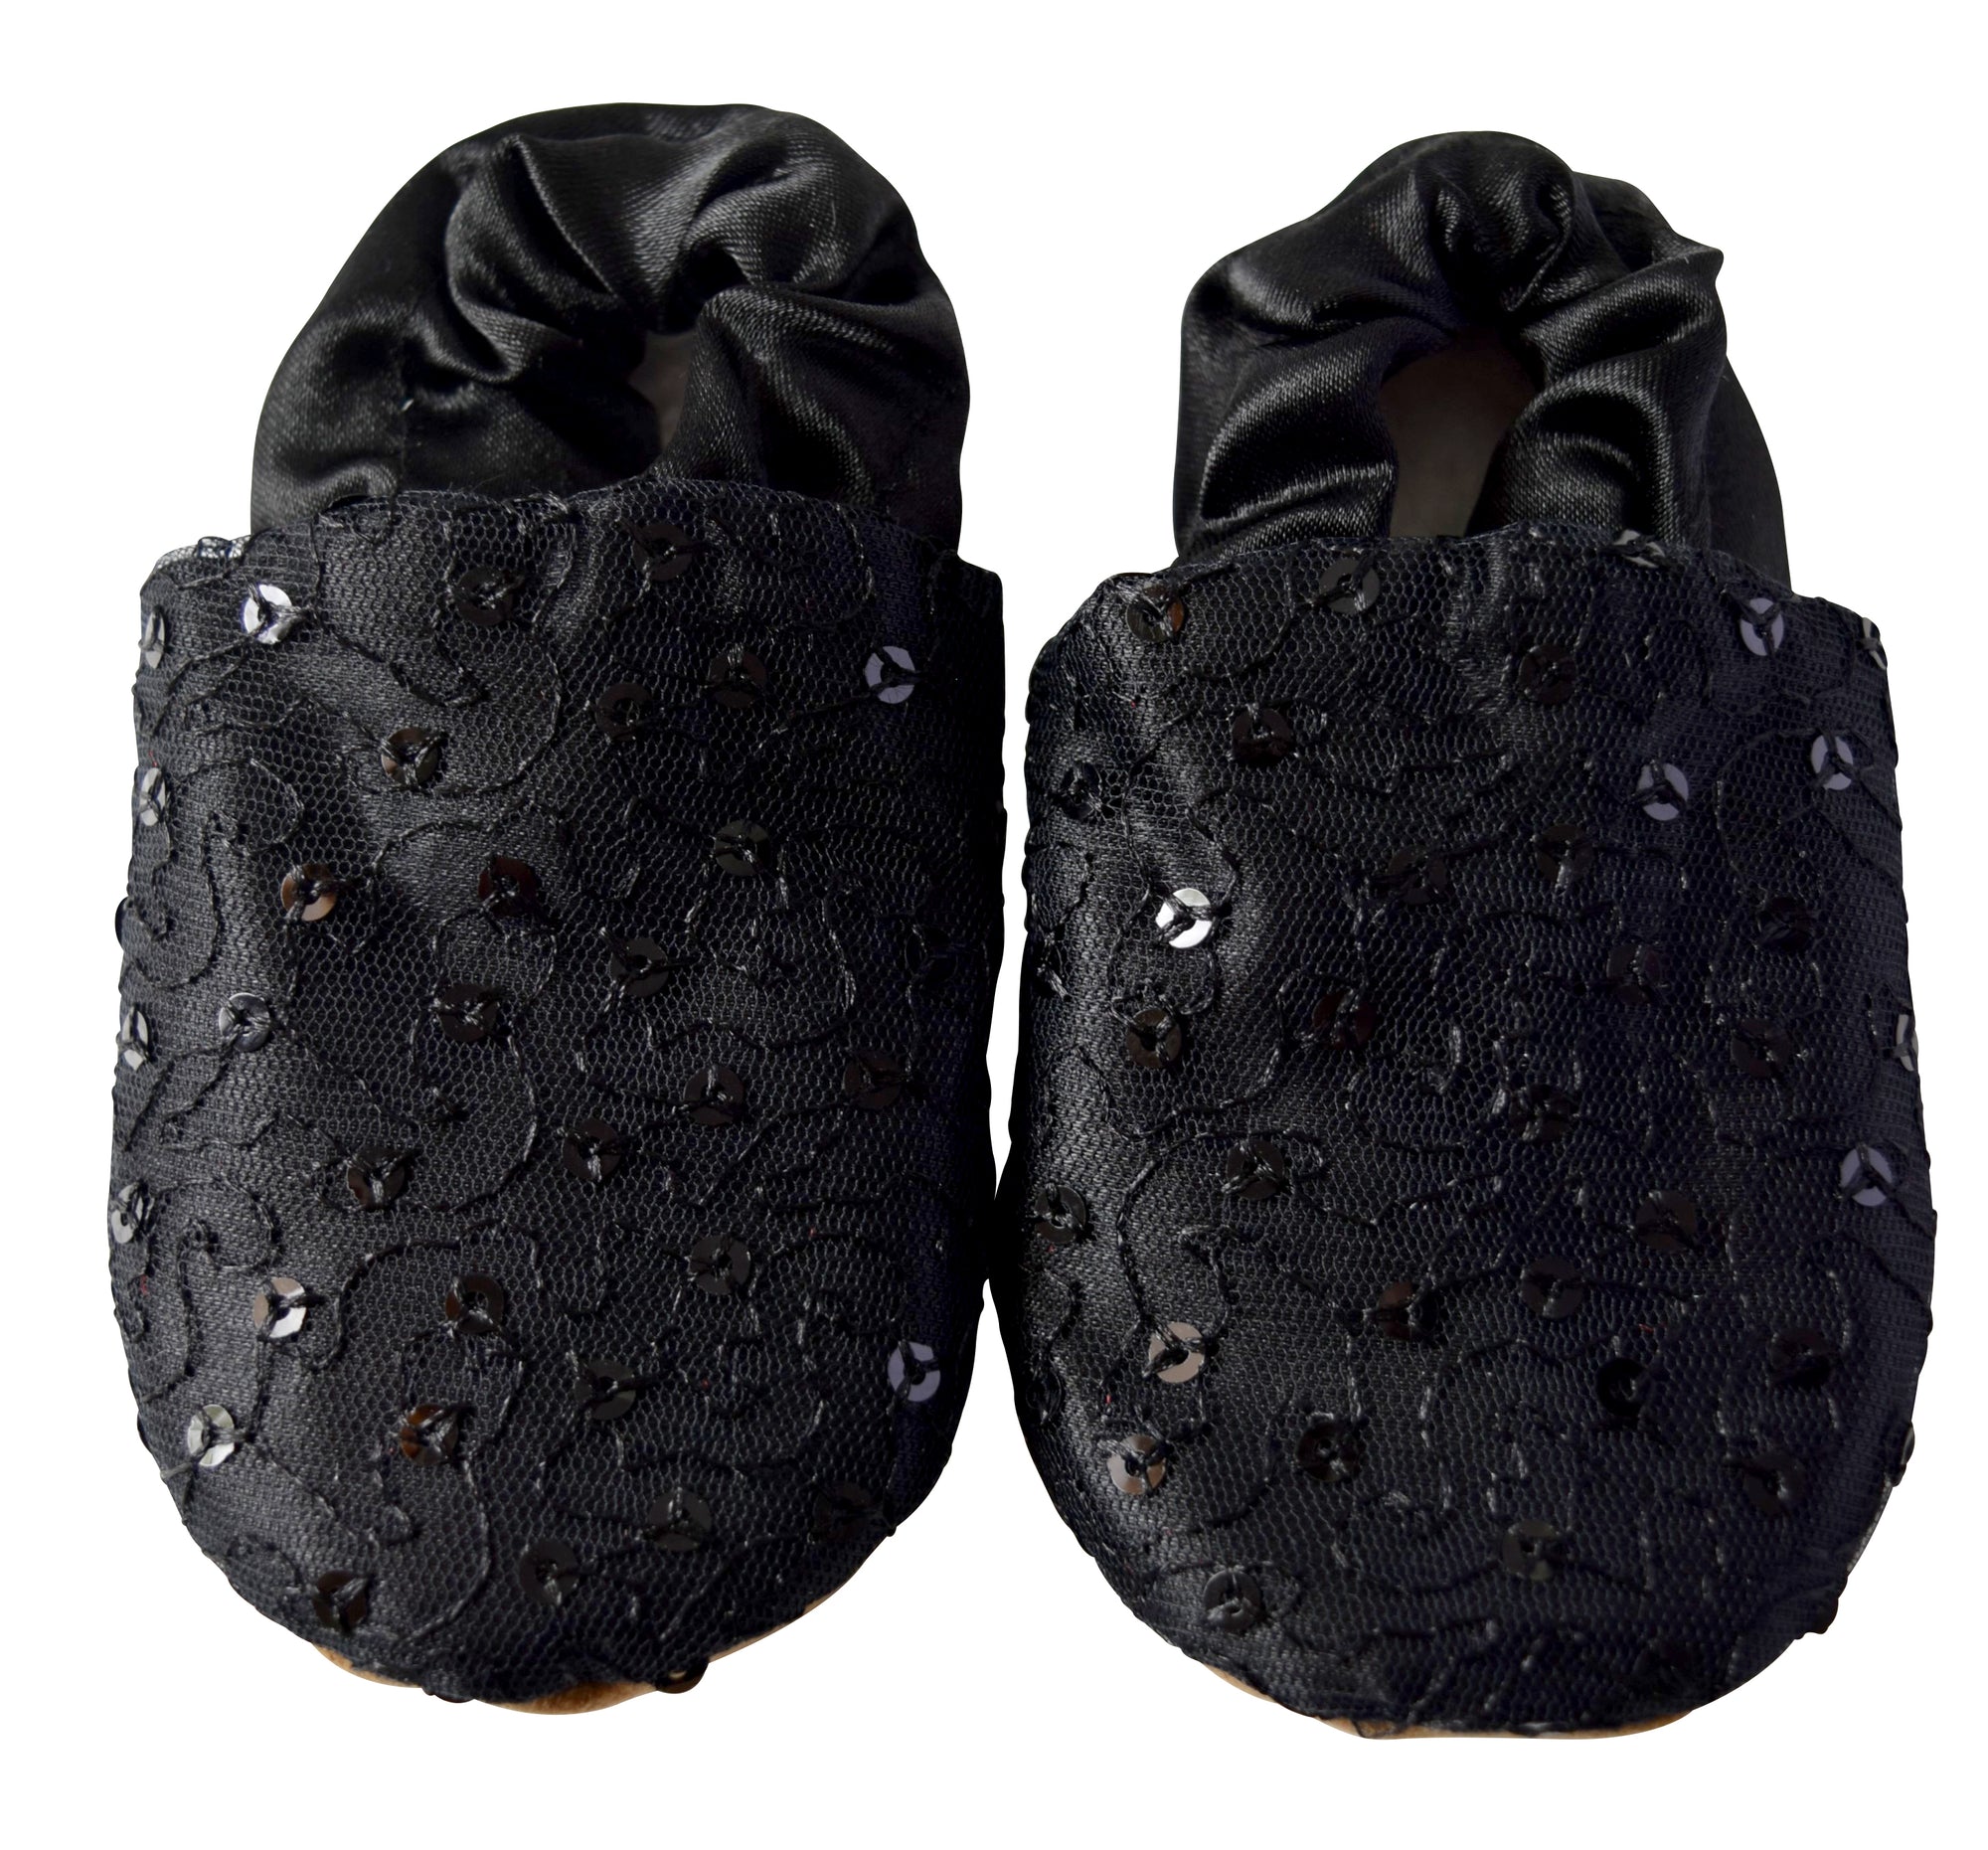 baby shoes_Black Mono Lace on Black Satin Booties 